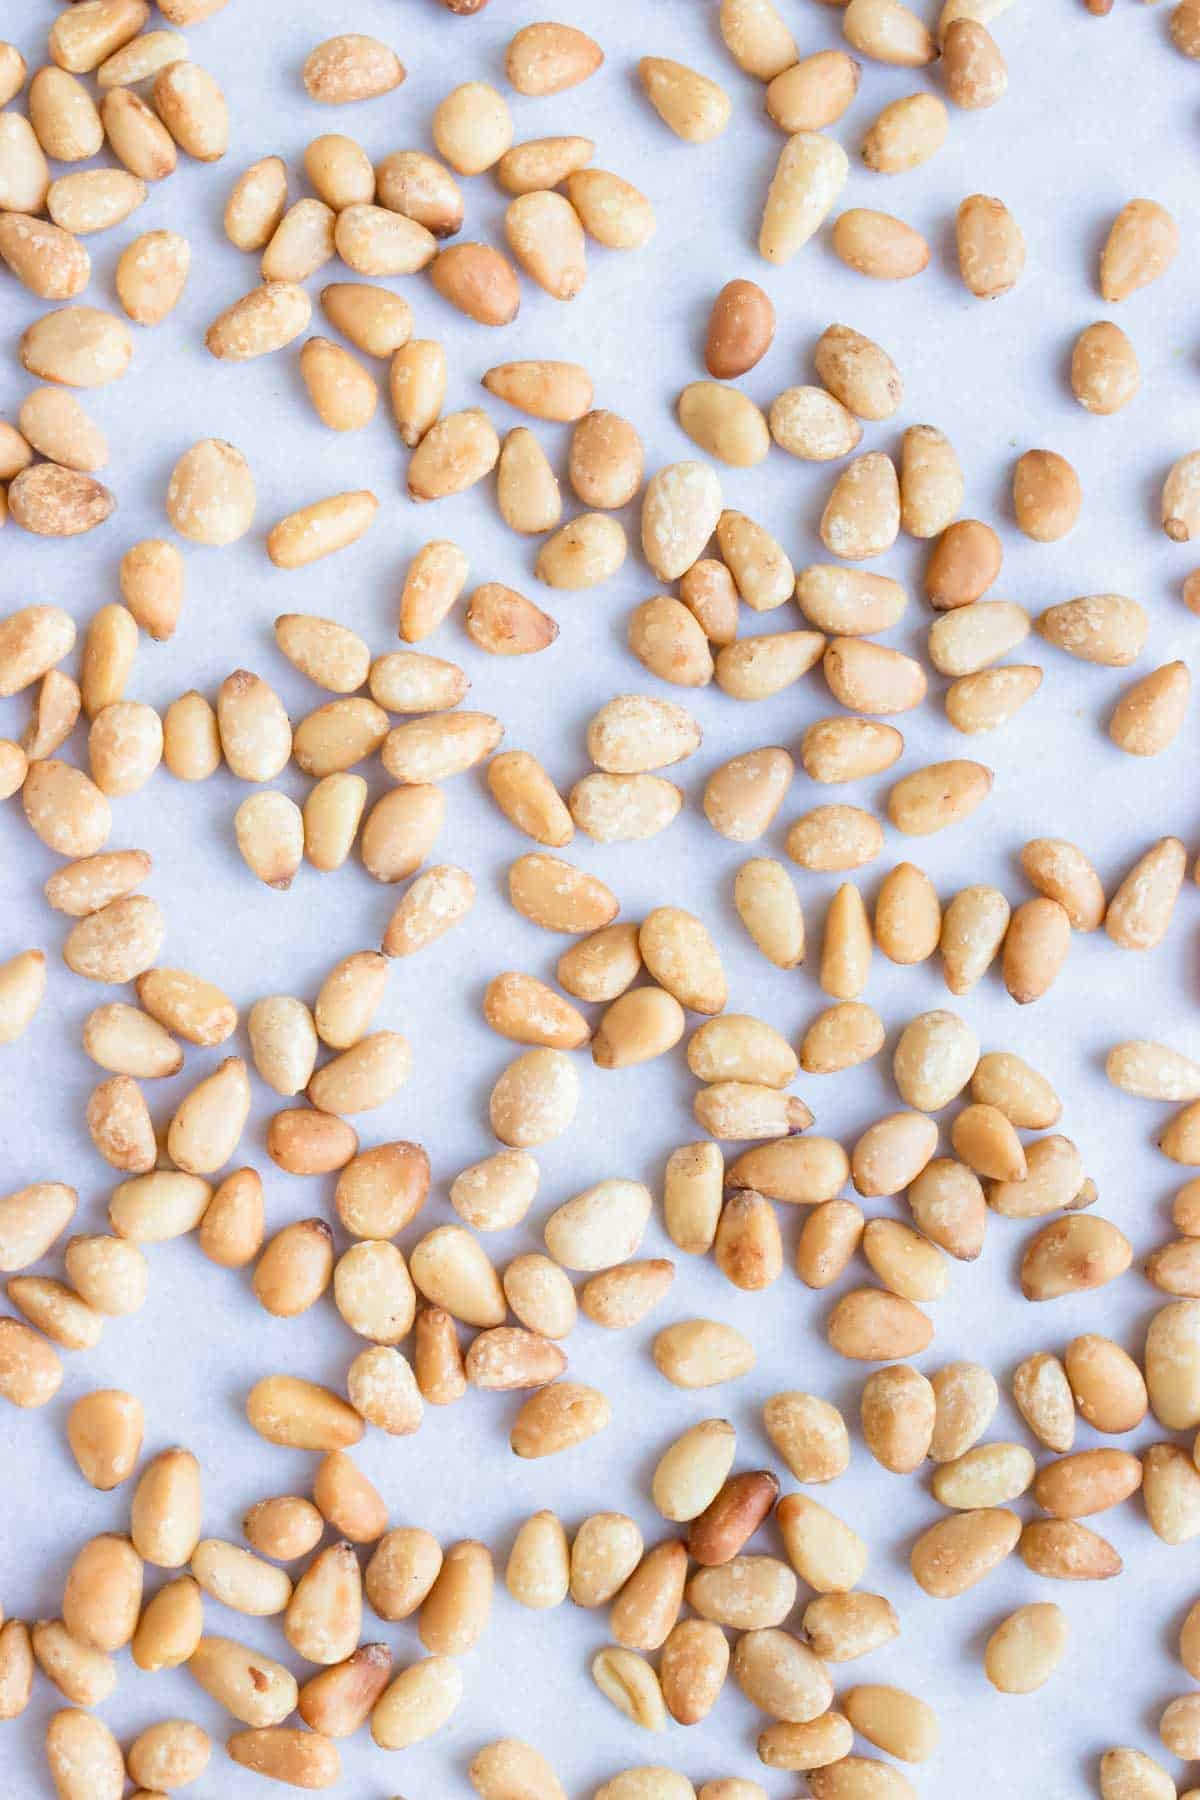 Roasted pine nuts are a golden brown color with a buttery, nutty flavor.